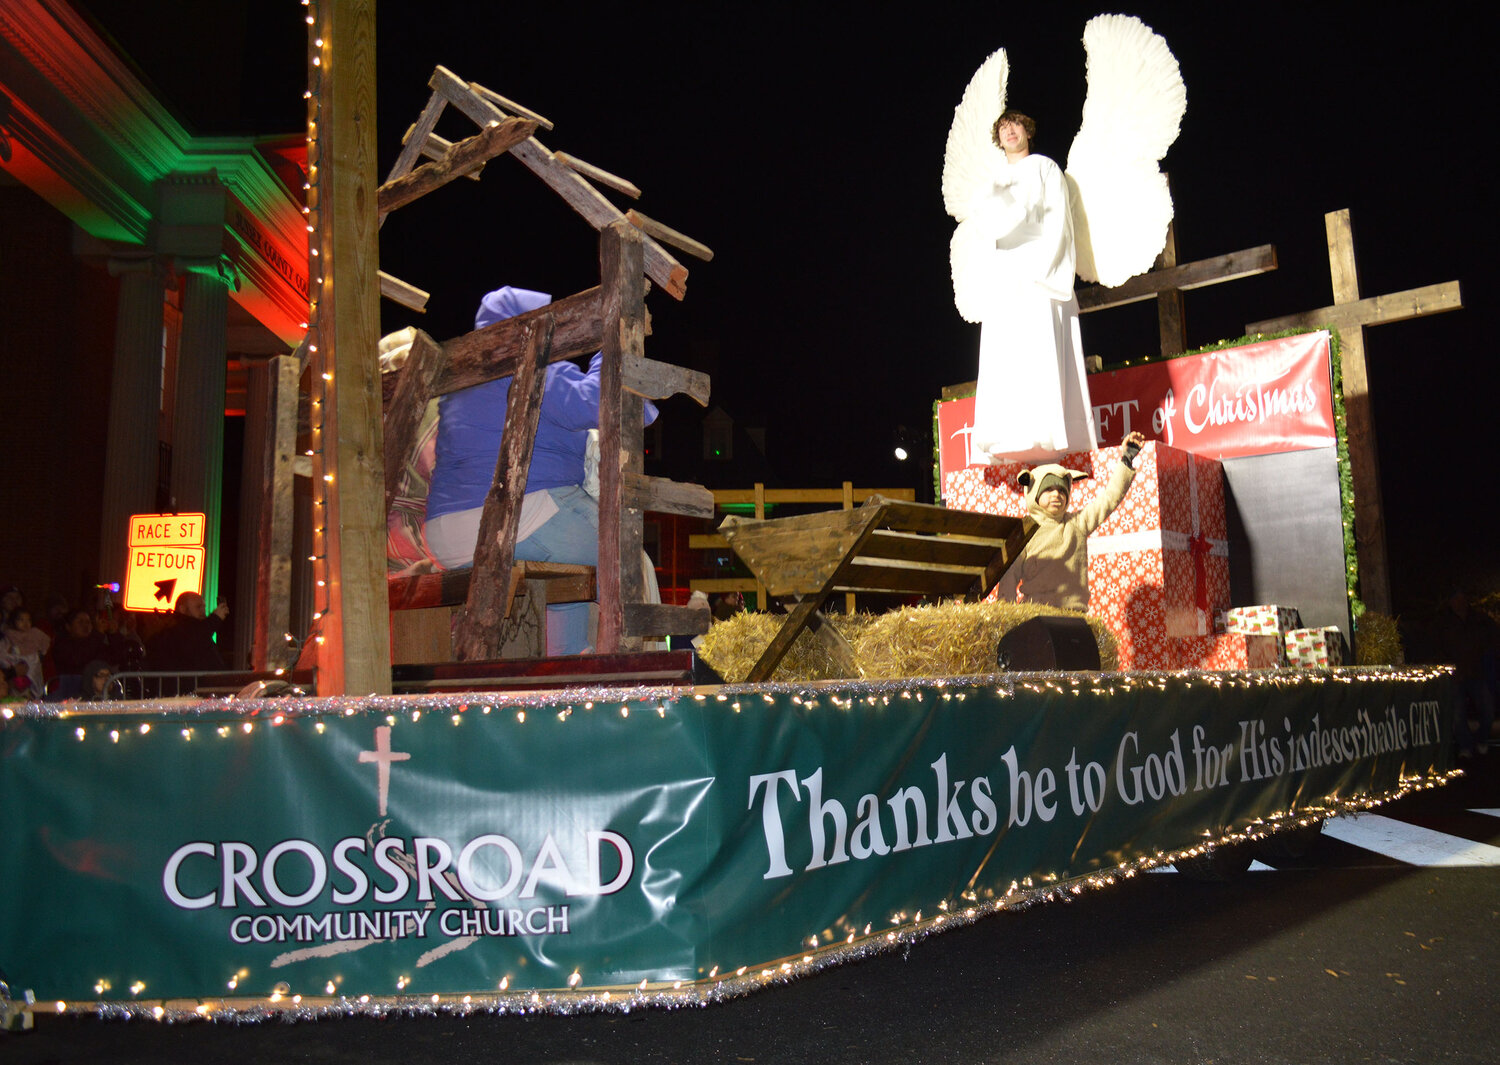 Crossroad Community Church showcases the reason for the season with its entry in the Georgetown Christmas Parade on Thursday.